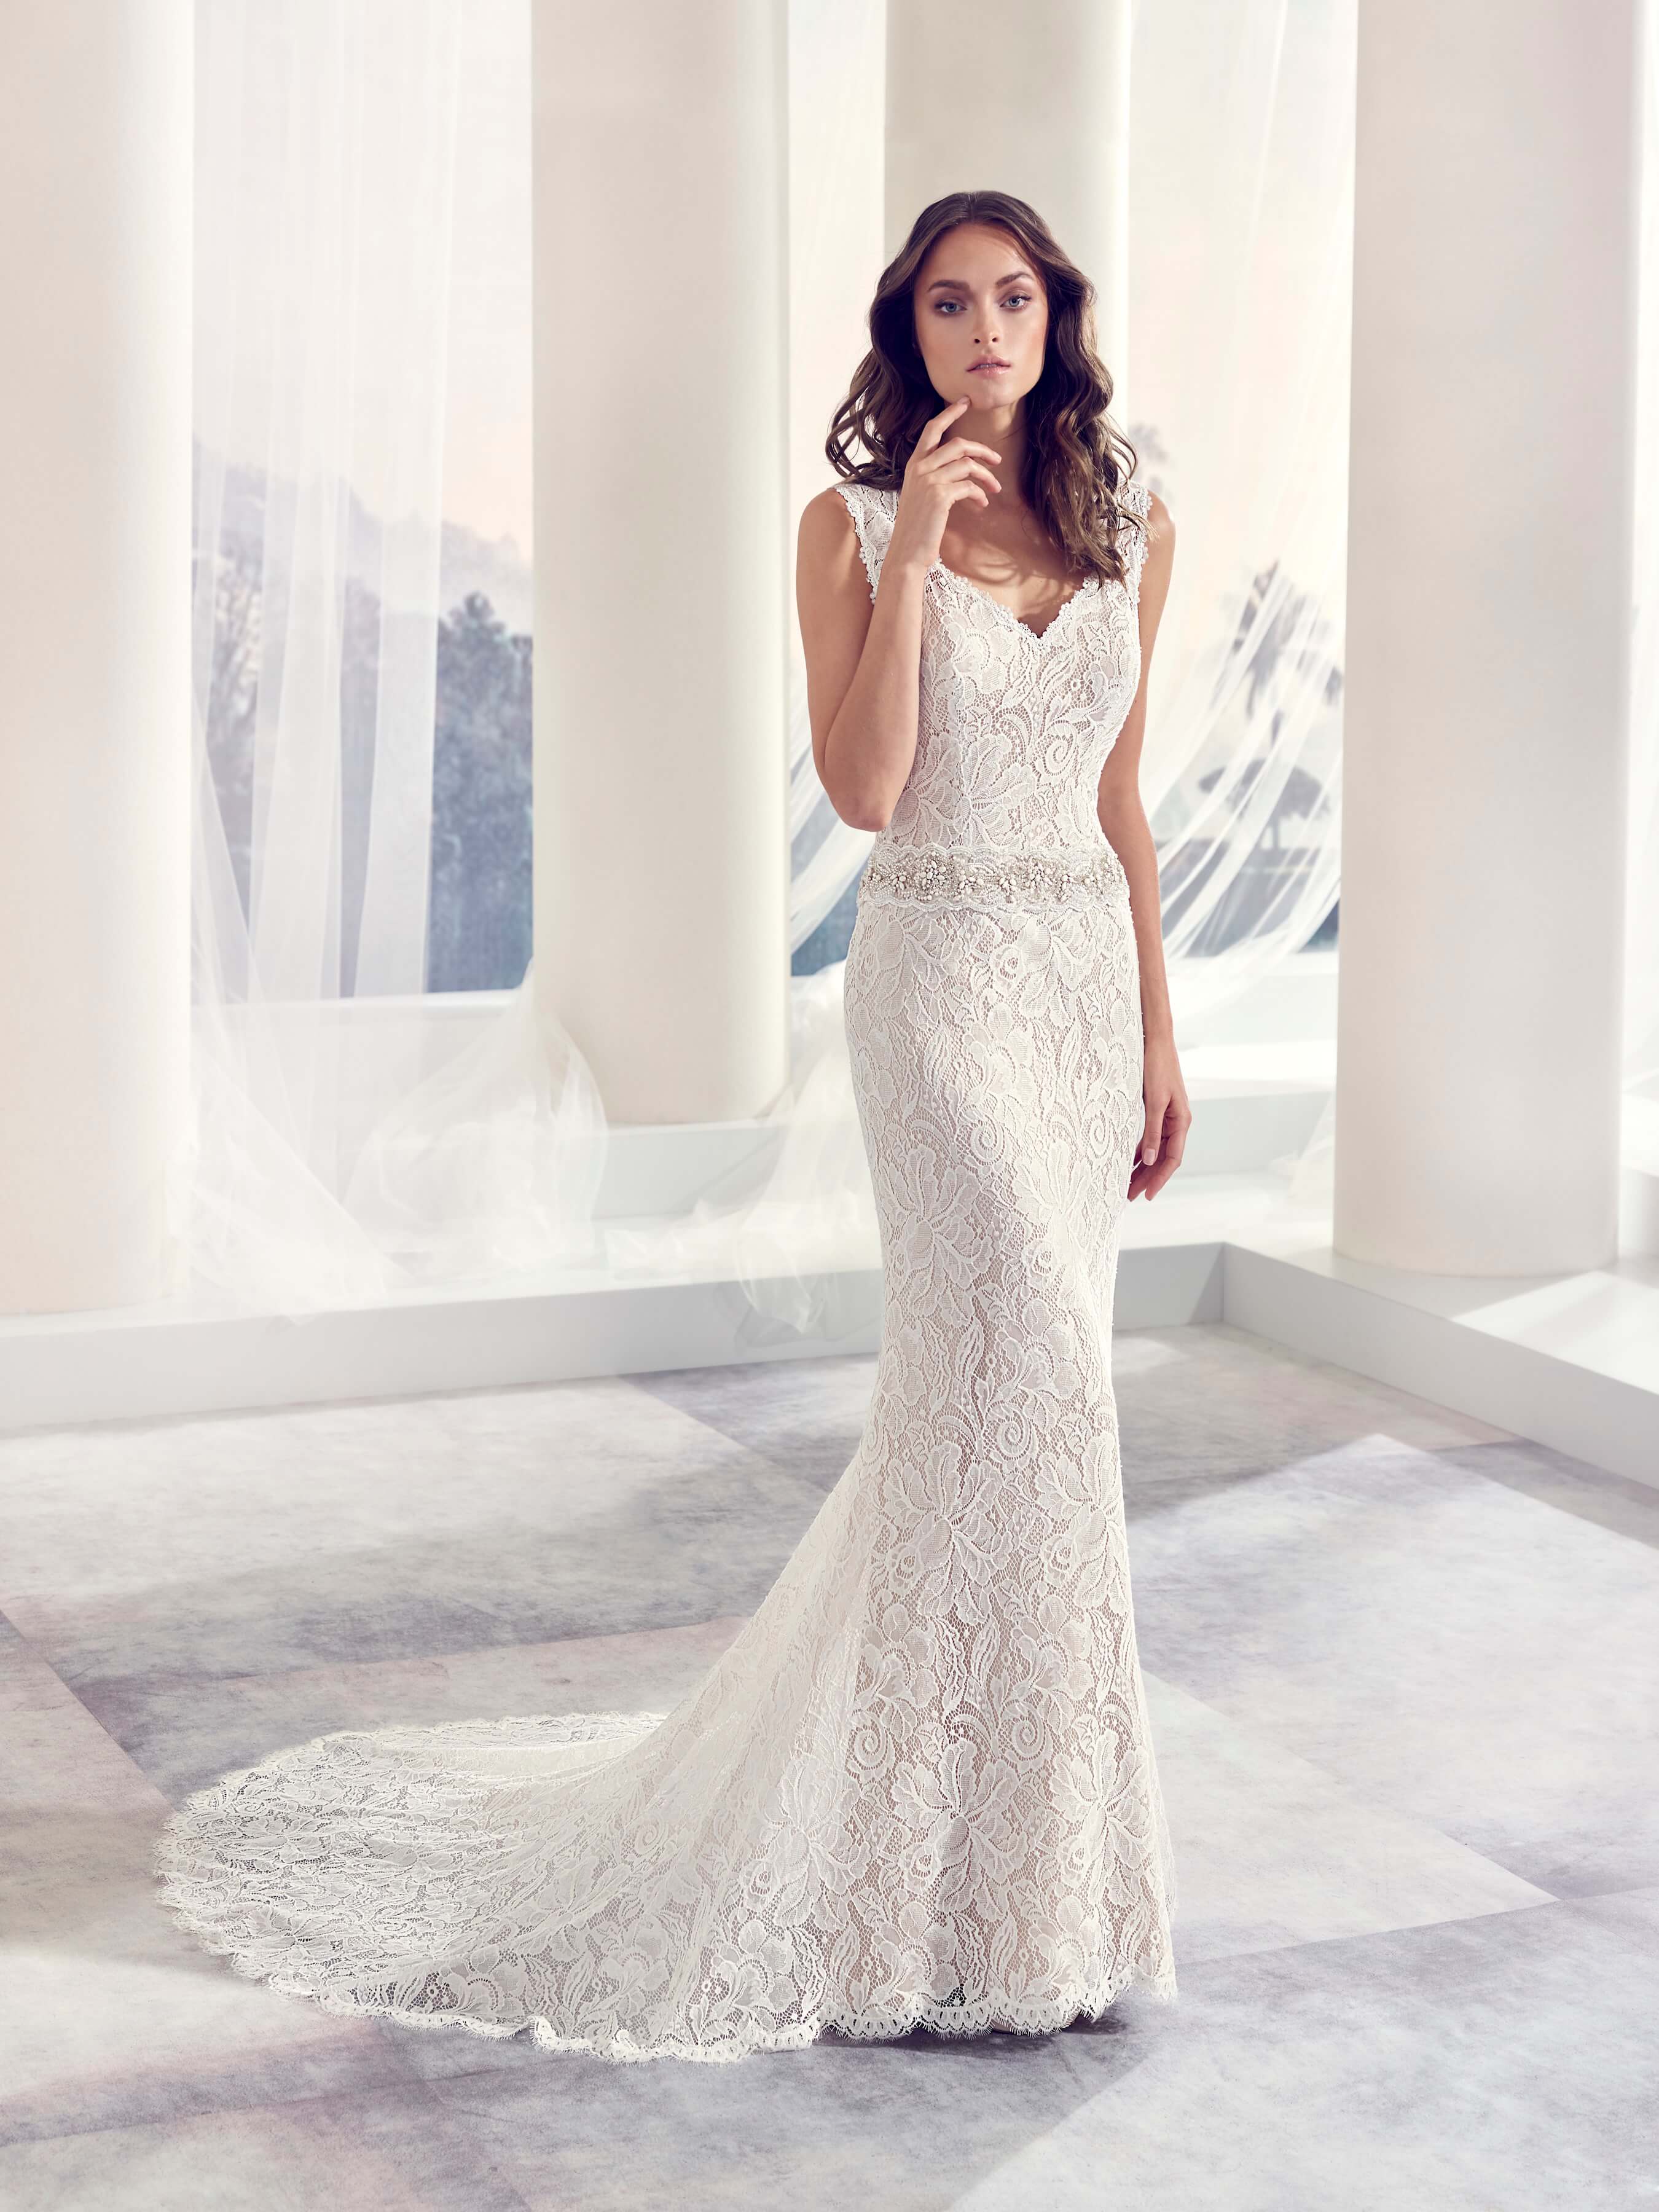 TIPTON wedding dresses and gowns